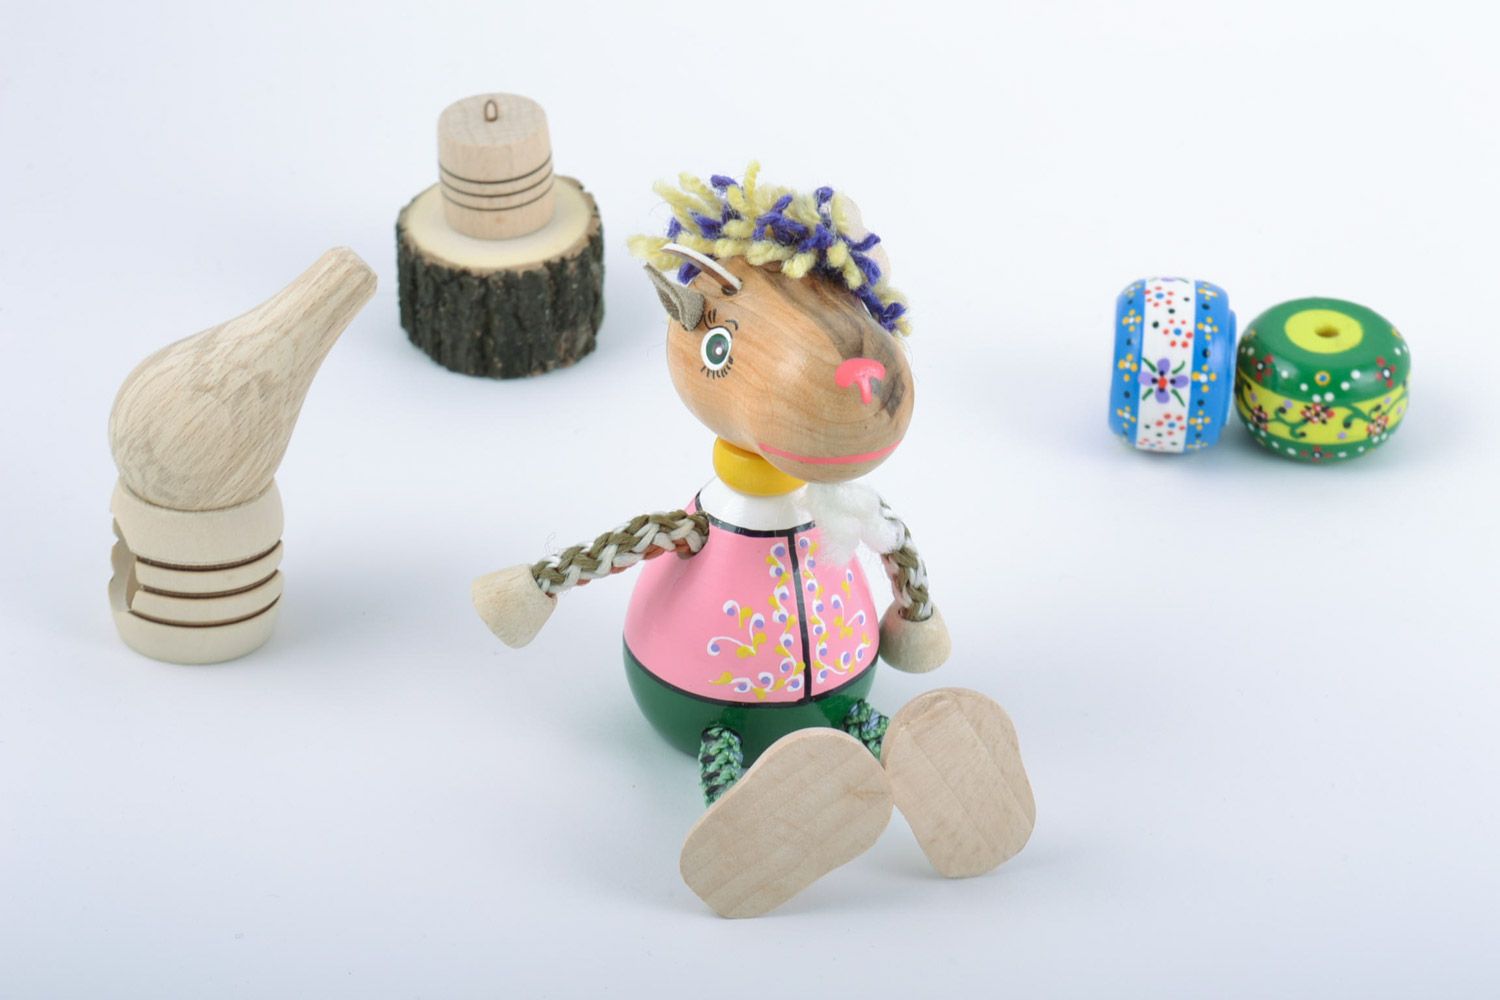 Homemade painted wooden eco toy goat for children and home interior photo 1